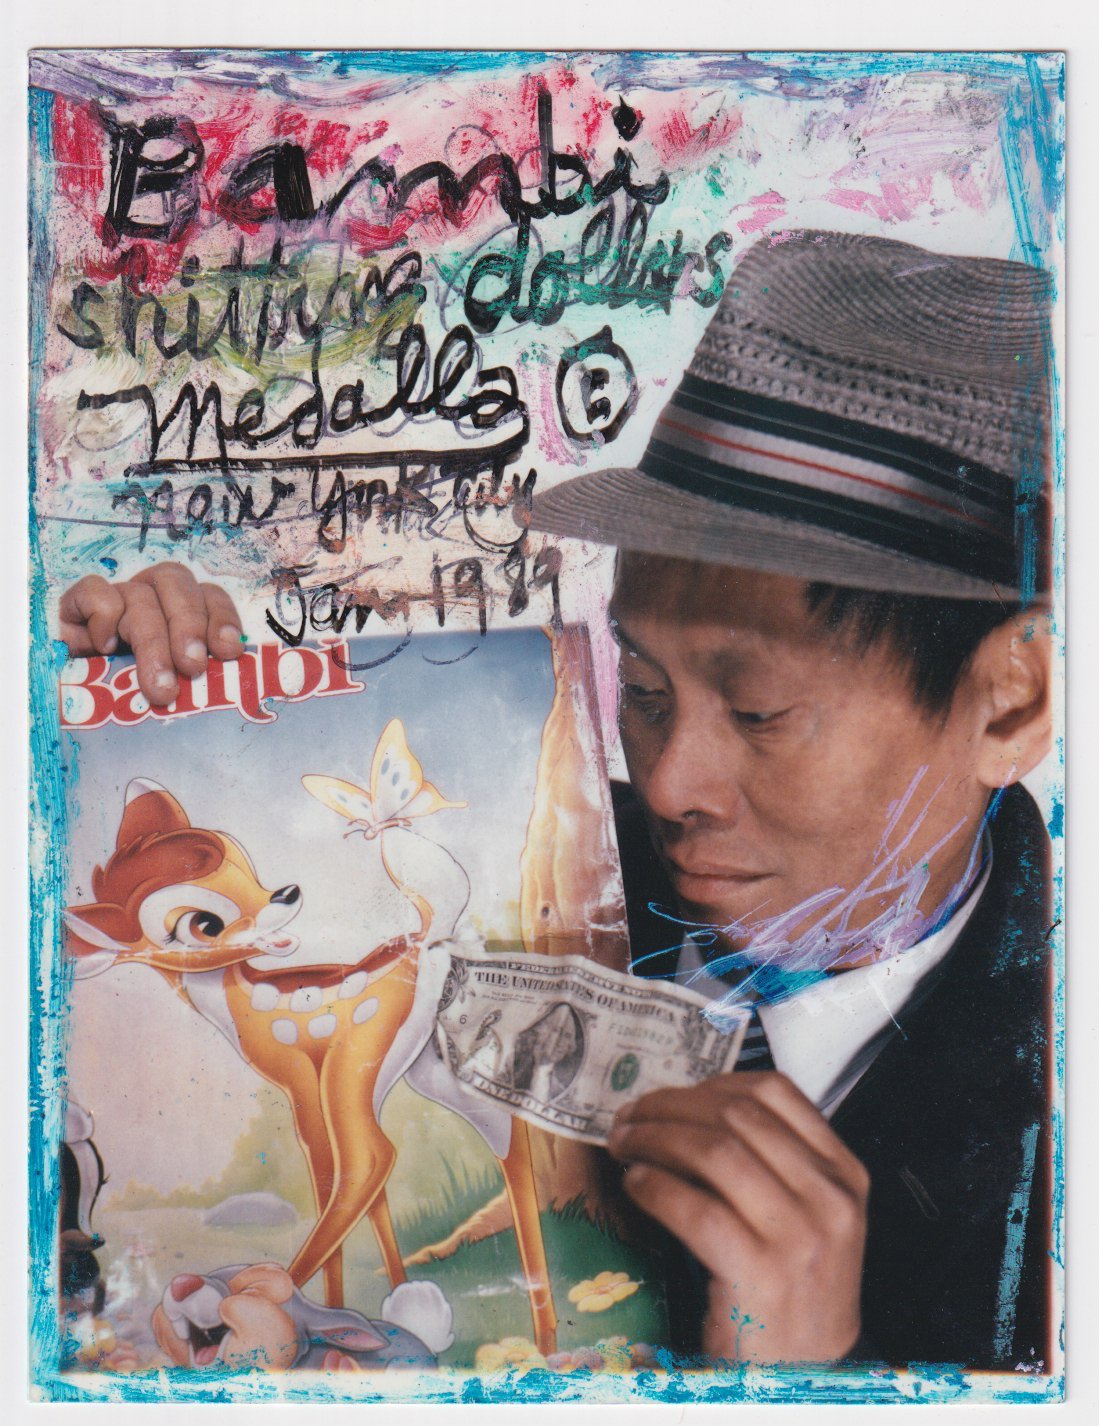 David Medalla, Bambi Shitting Dollars, 1989, collage on paper, Courtesy private collection. Photo: Mareike Tocha